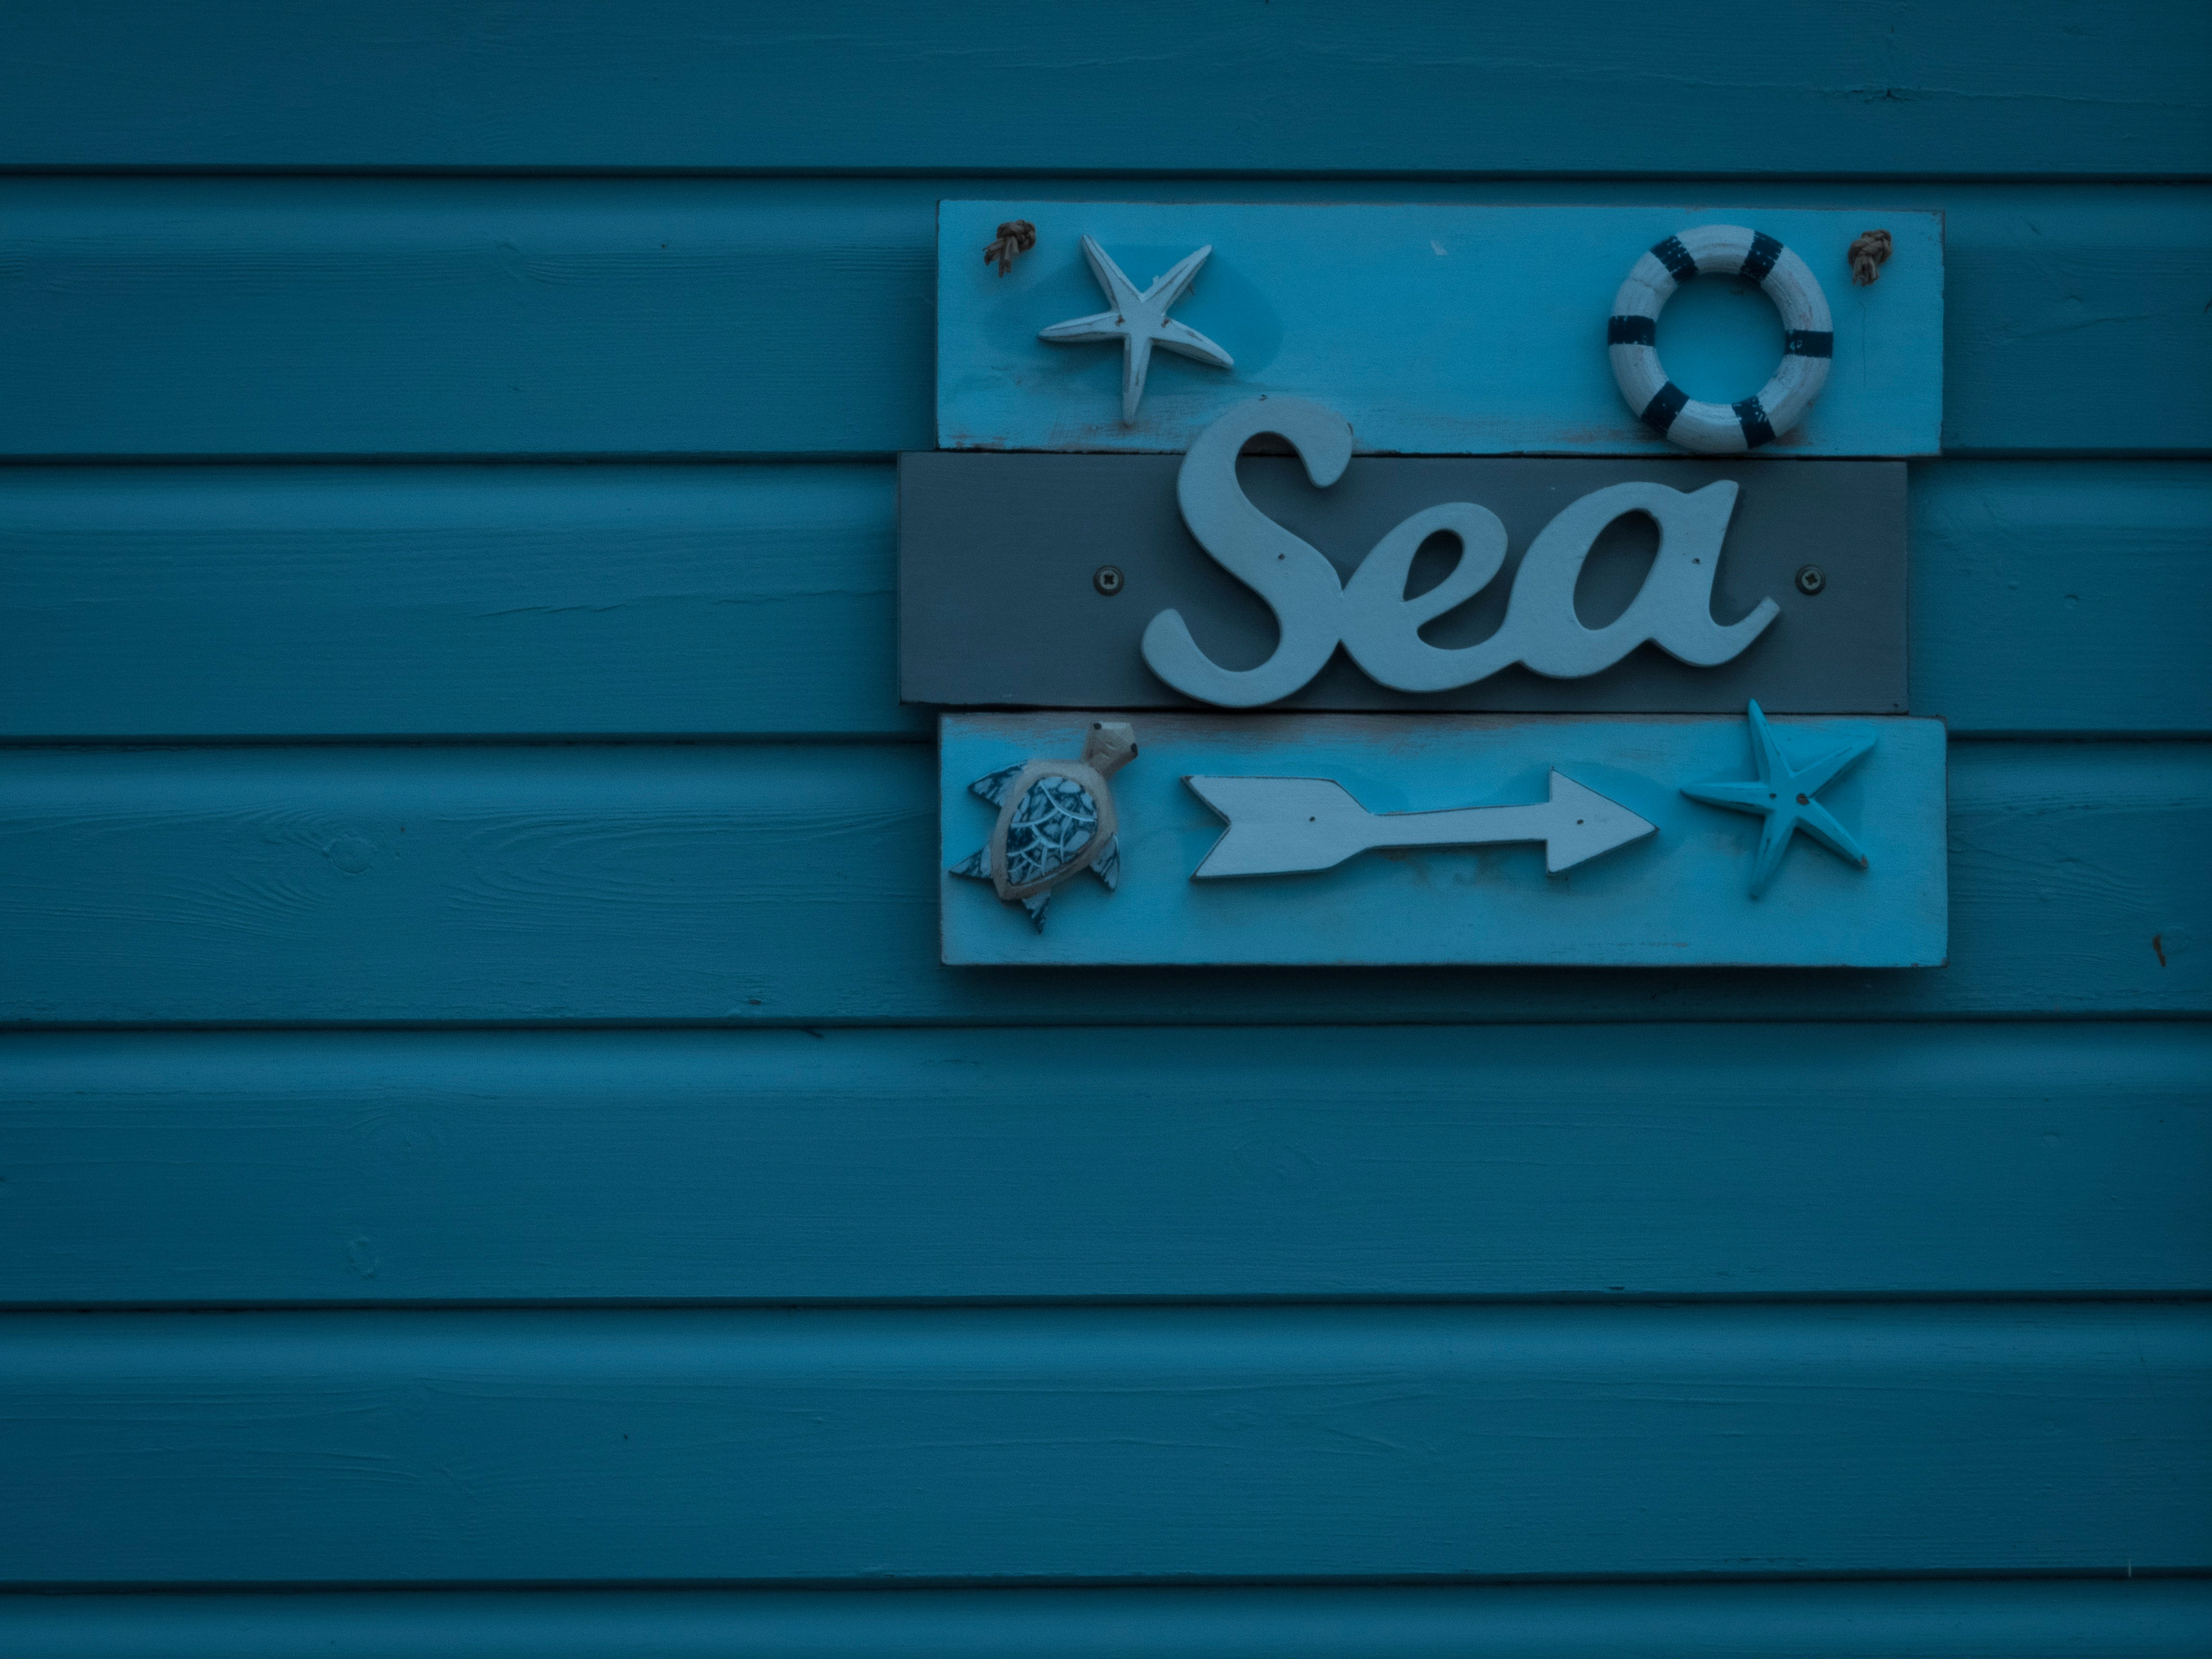 blue and brown sea signboard on wall